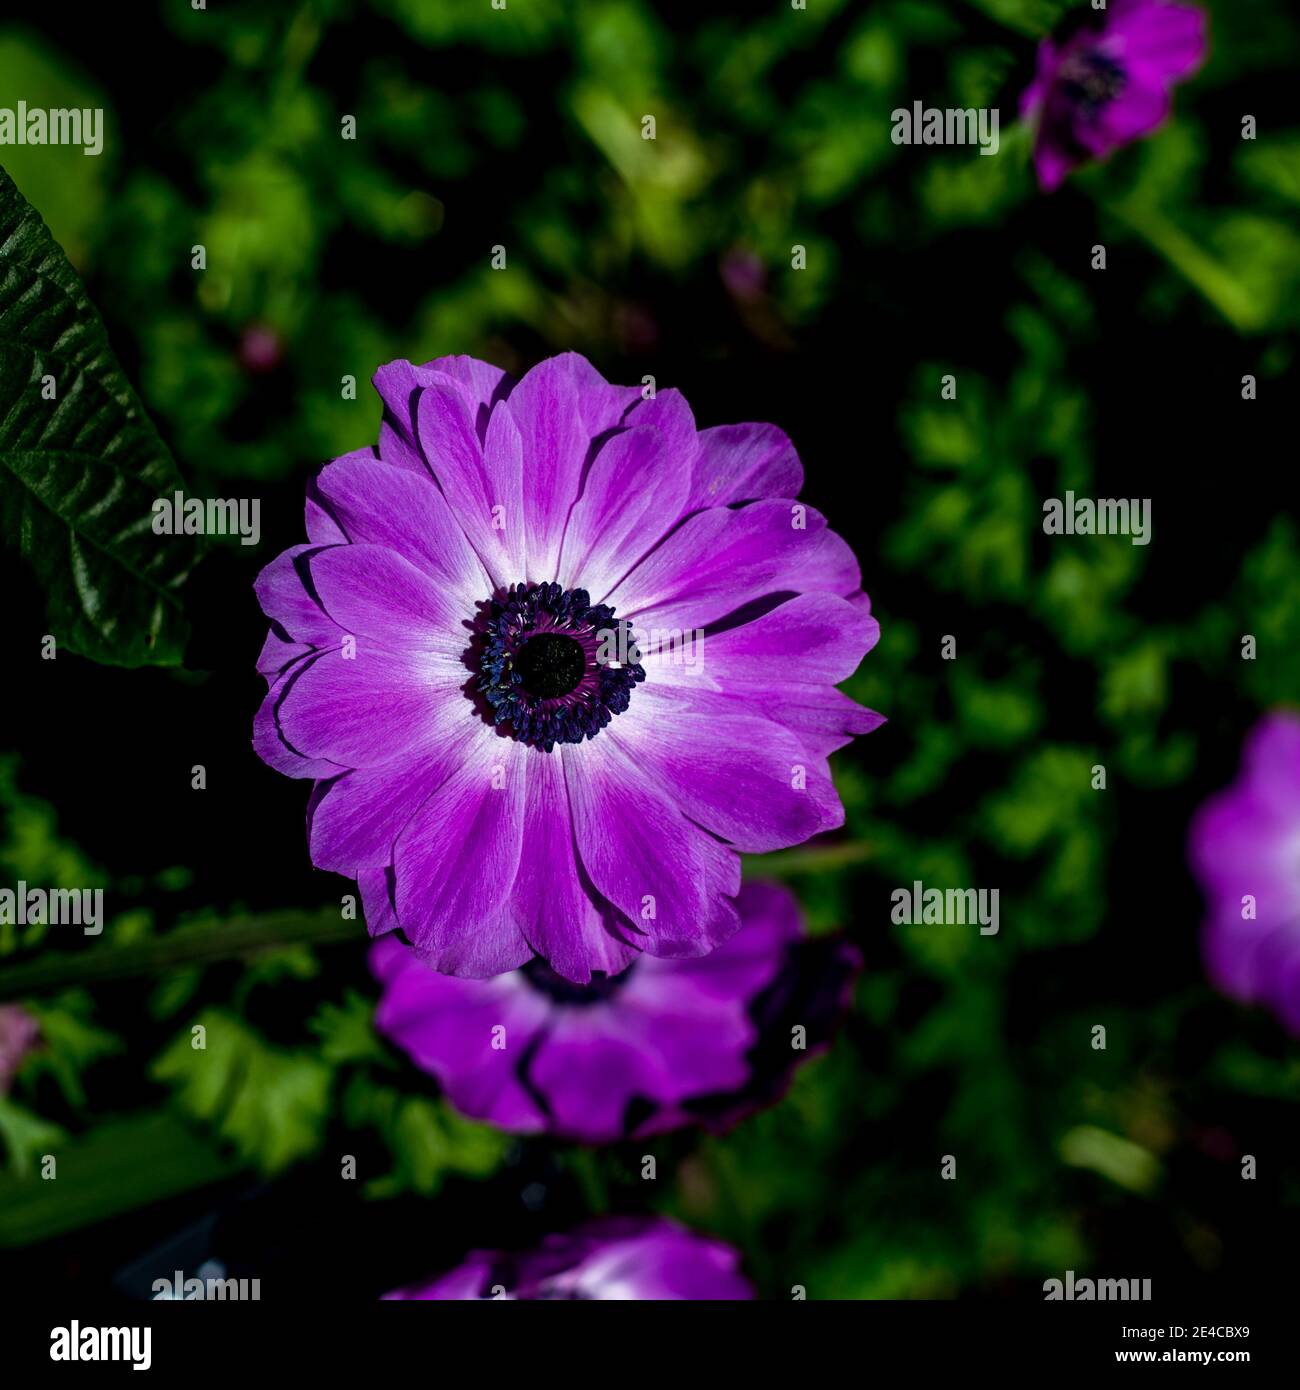 Closeup of the purple Cineraria flower in a garden setting, highlighted by natural sunlight. Stock Photo